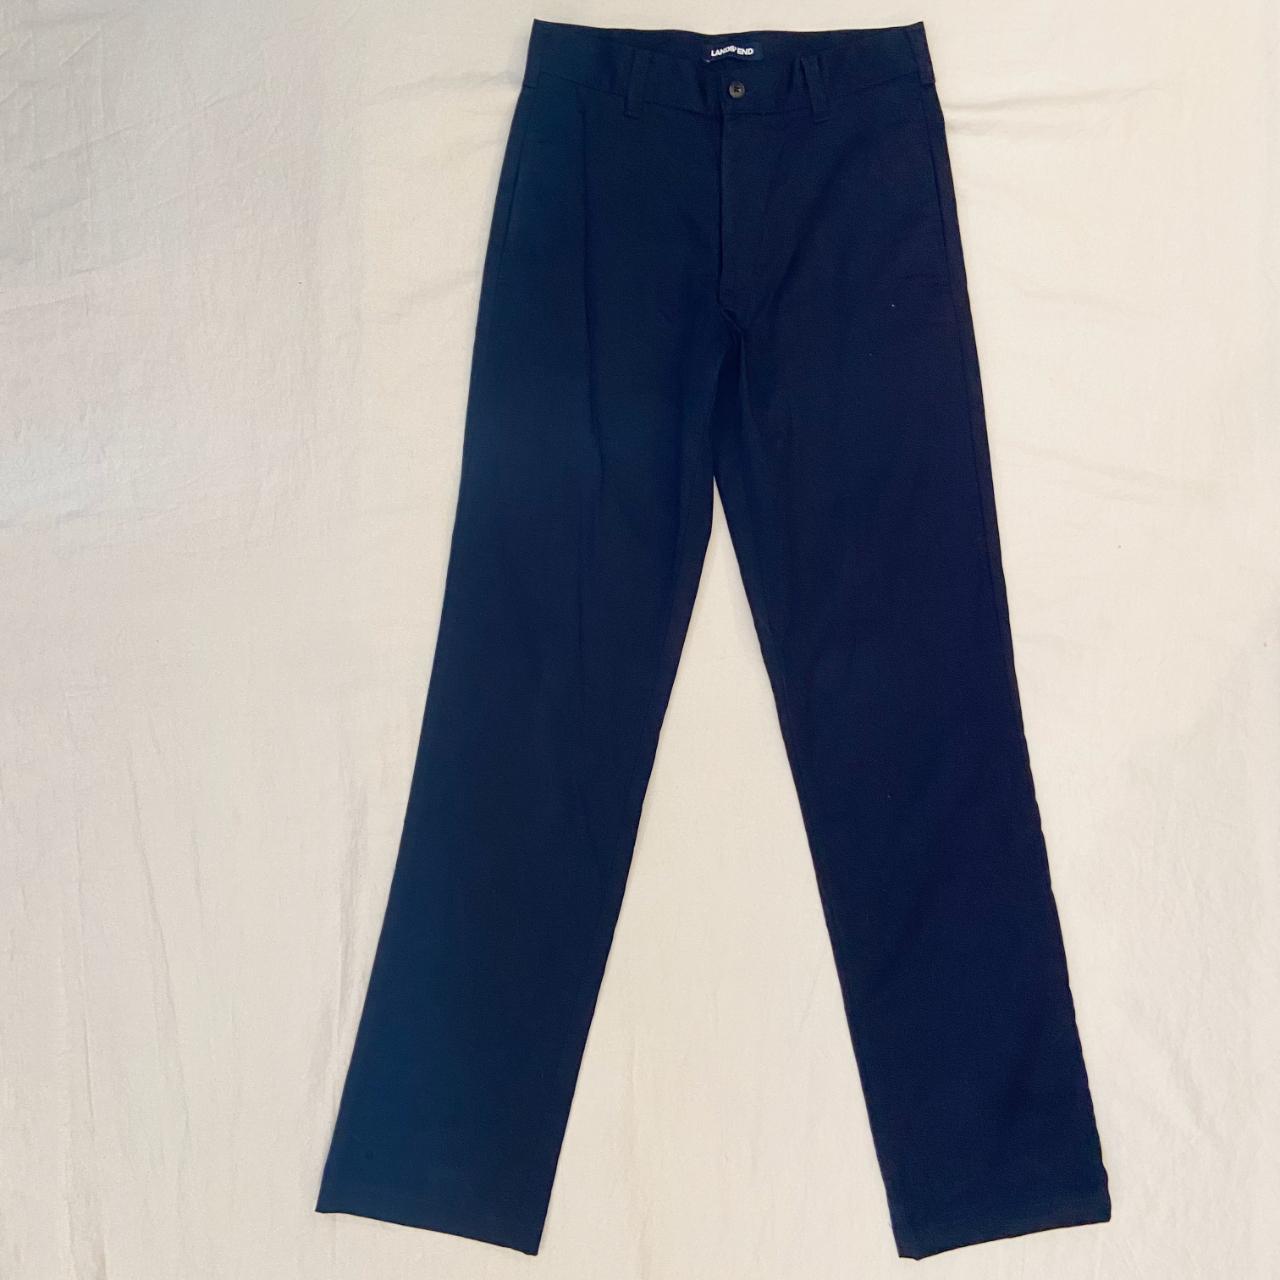 Land's End Navy Blue Trousers Waist: 27